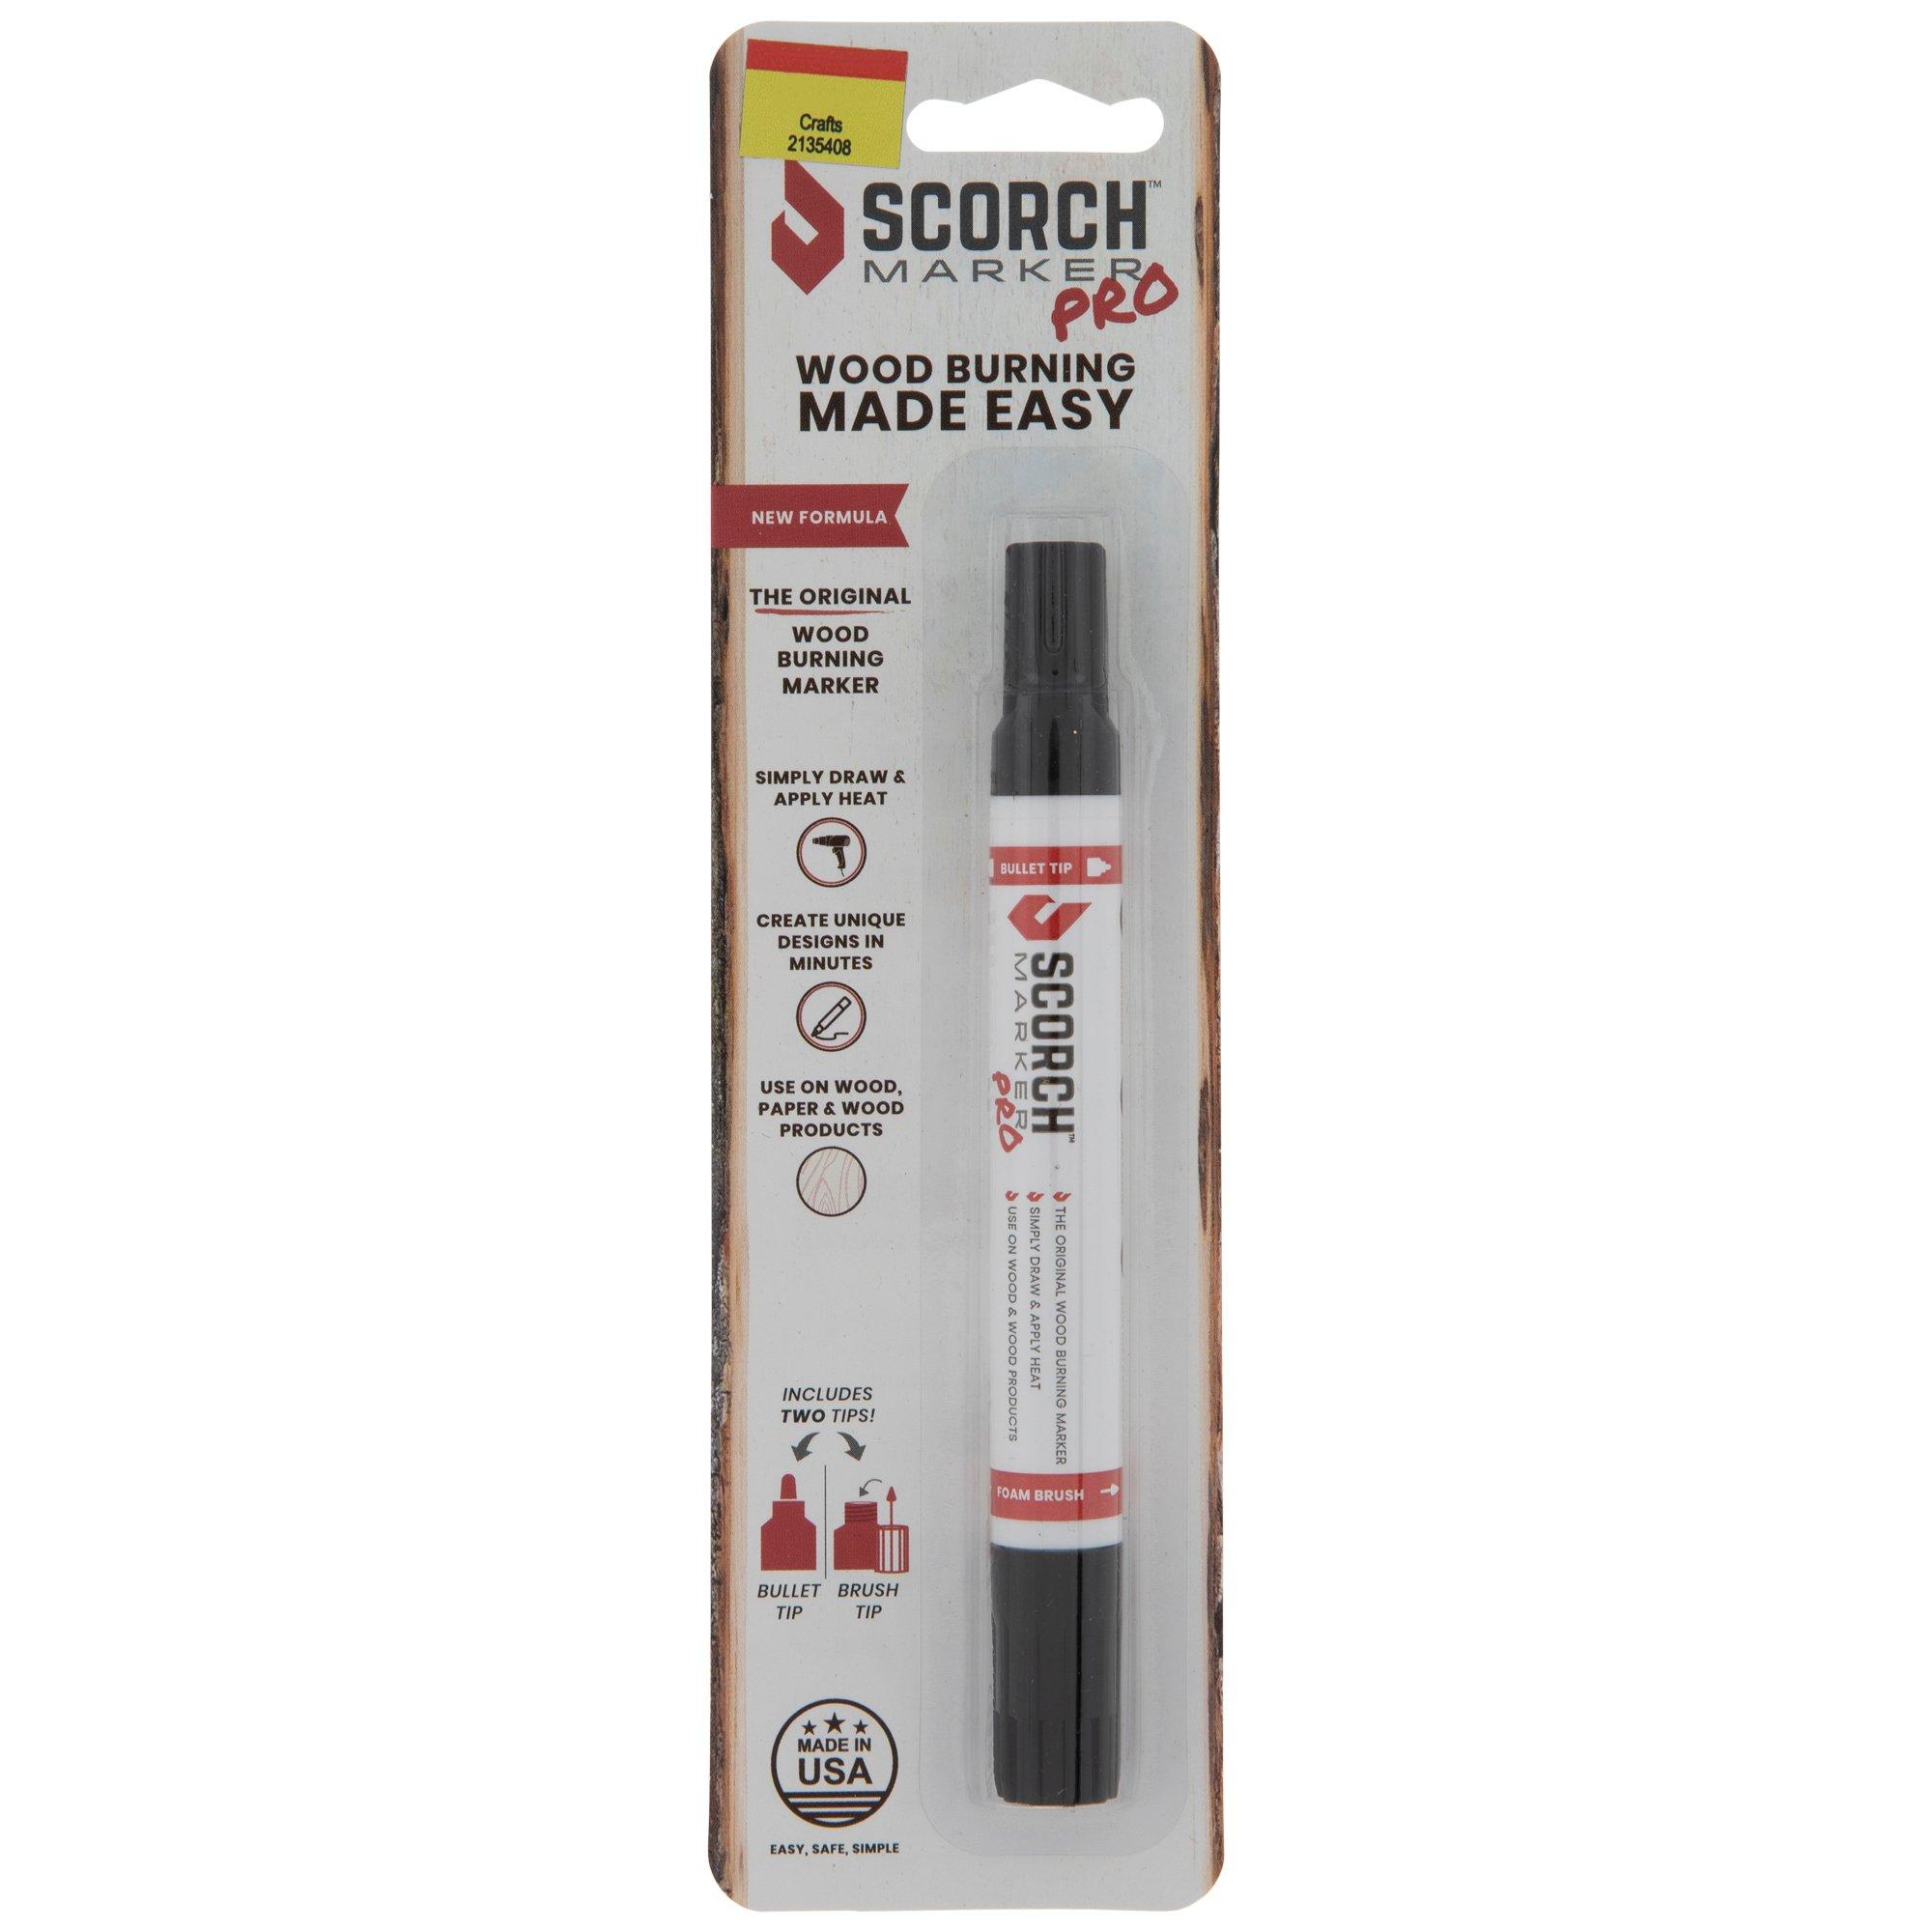 GBSELL Wood Burning Pen Set For DIY Wood Painting Scorch Markers For Wood,  Scorch Pen Marker for Crafting & Stencil Wood Burning, Marker for Burning